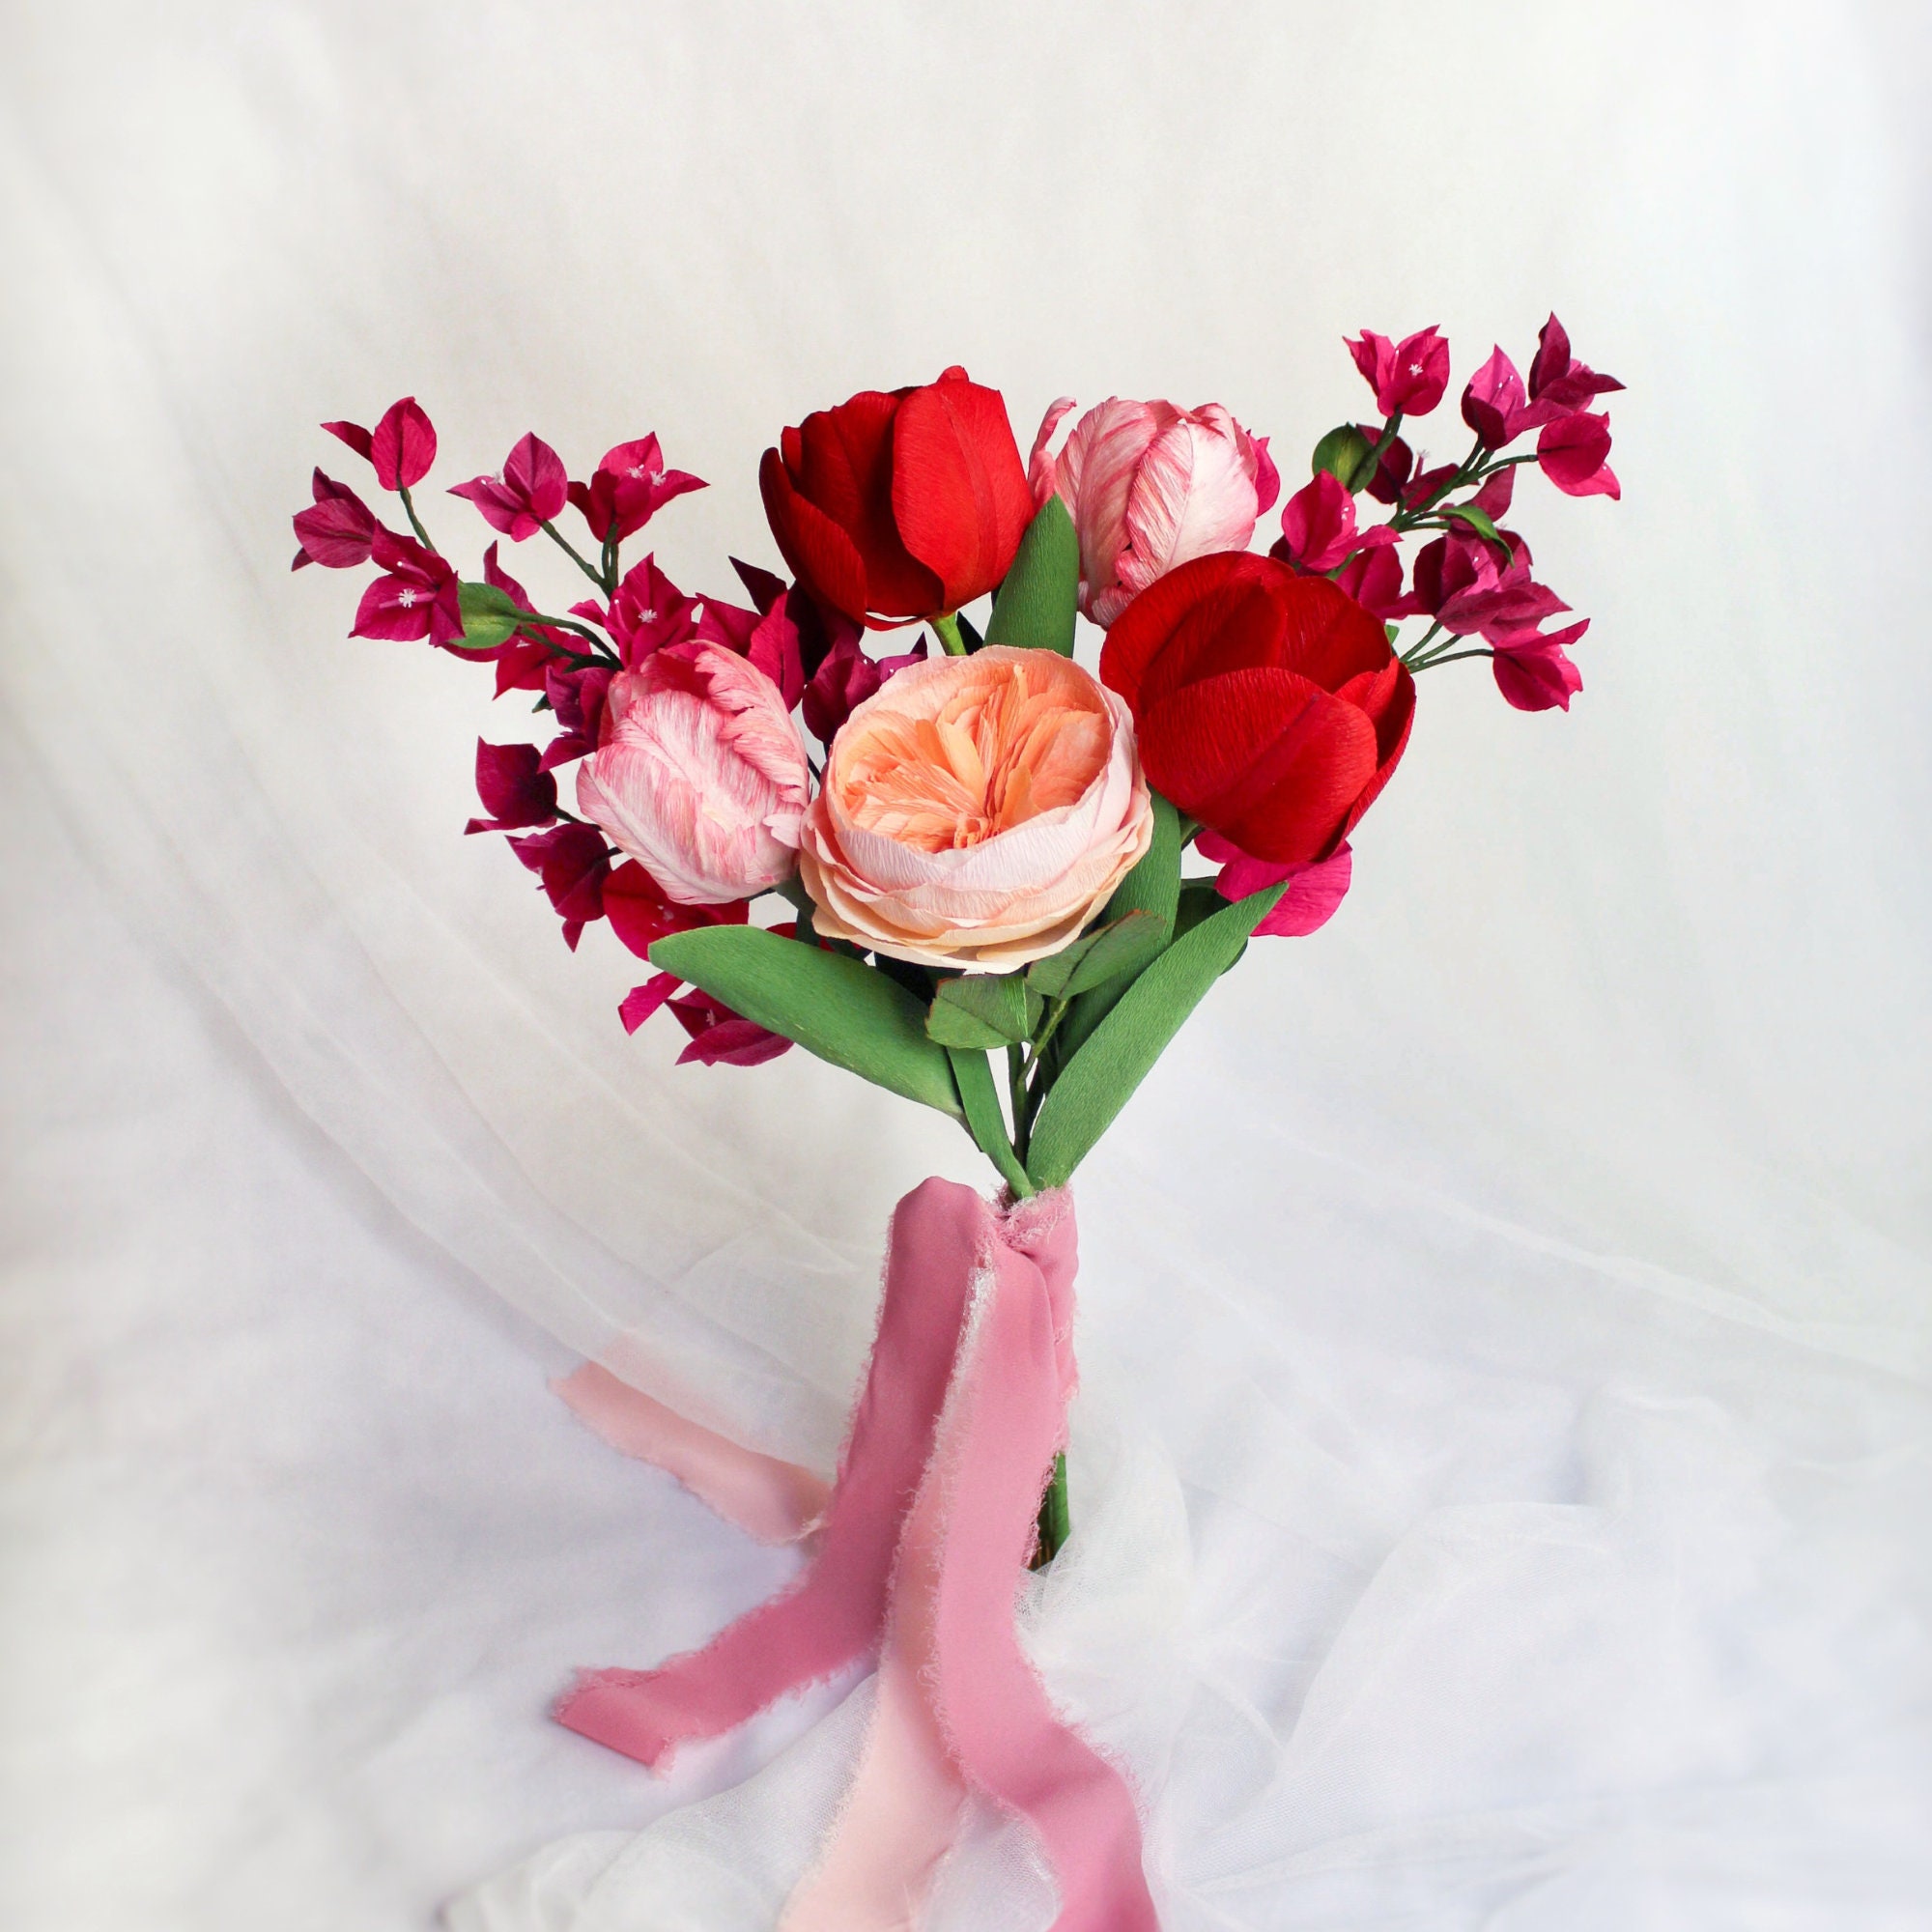 Crepe Paper Flower Bouquet, Paper Flower Arrangement, Realistic Paper  Flowers, 1st Year Anniversary Gift, Handmade Paper Flowers for Decor 